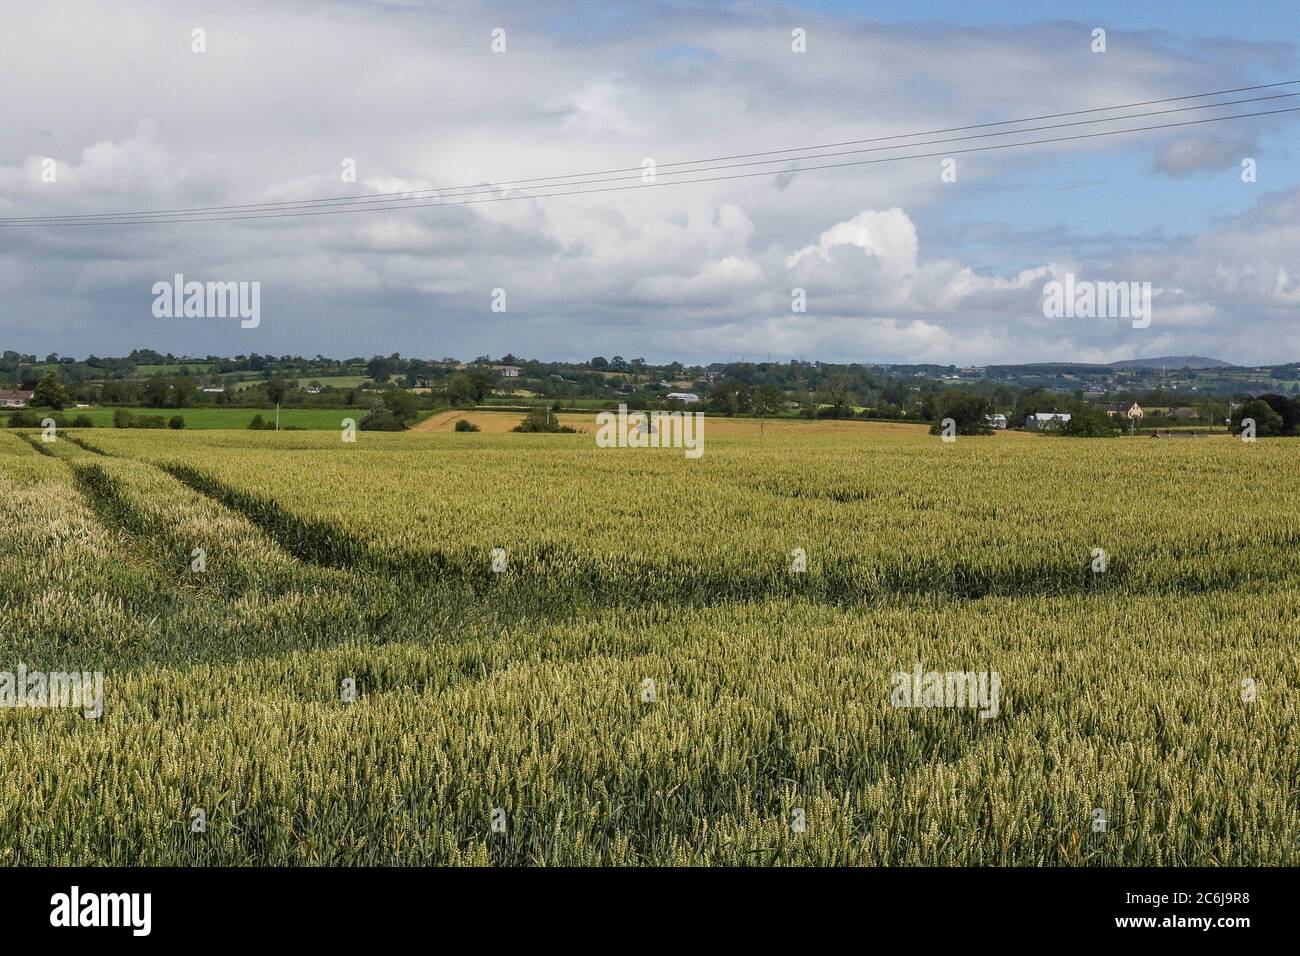 Broomhedge, County Antrim, Northern Ireland. 10 July 2020. UK weather – mild but frequent showers and sunshine due on a north westerly breeze. Credit: CAZIMB/Alamy Live News. Stock Photo